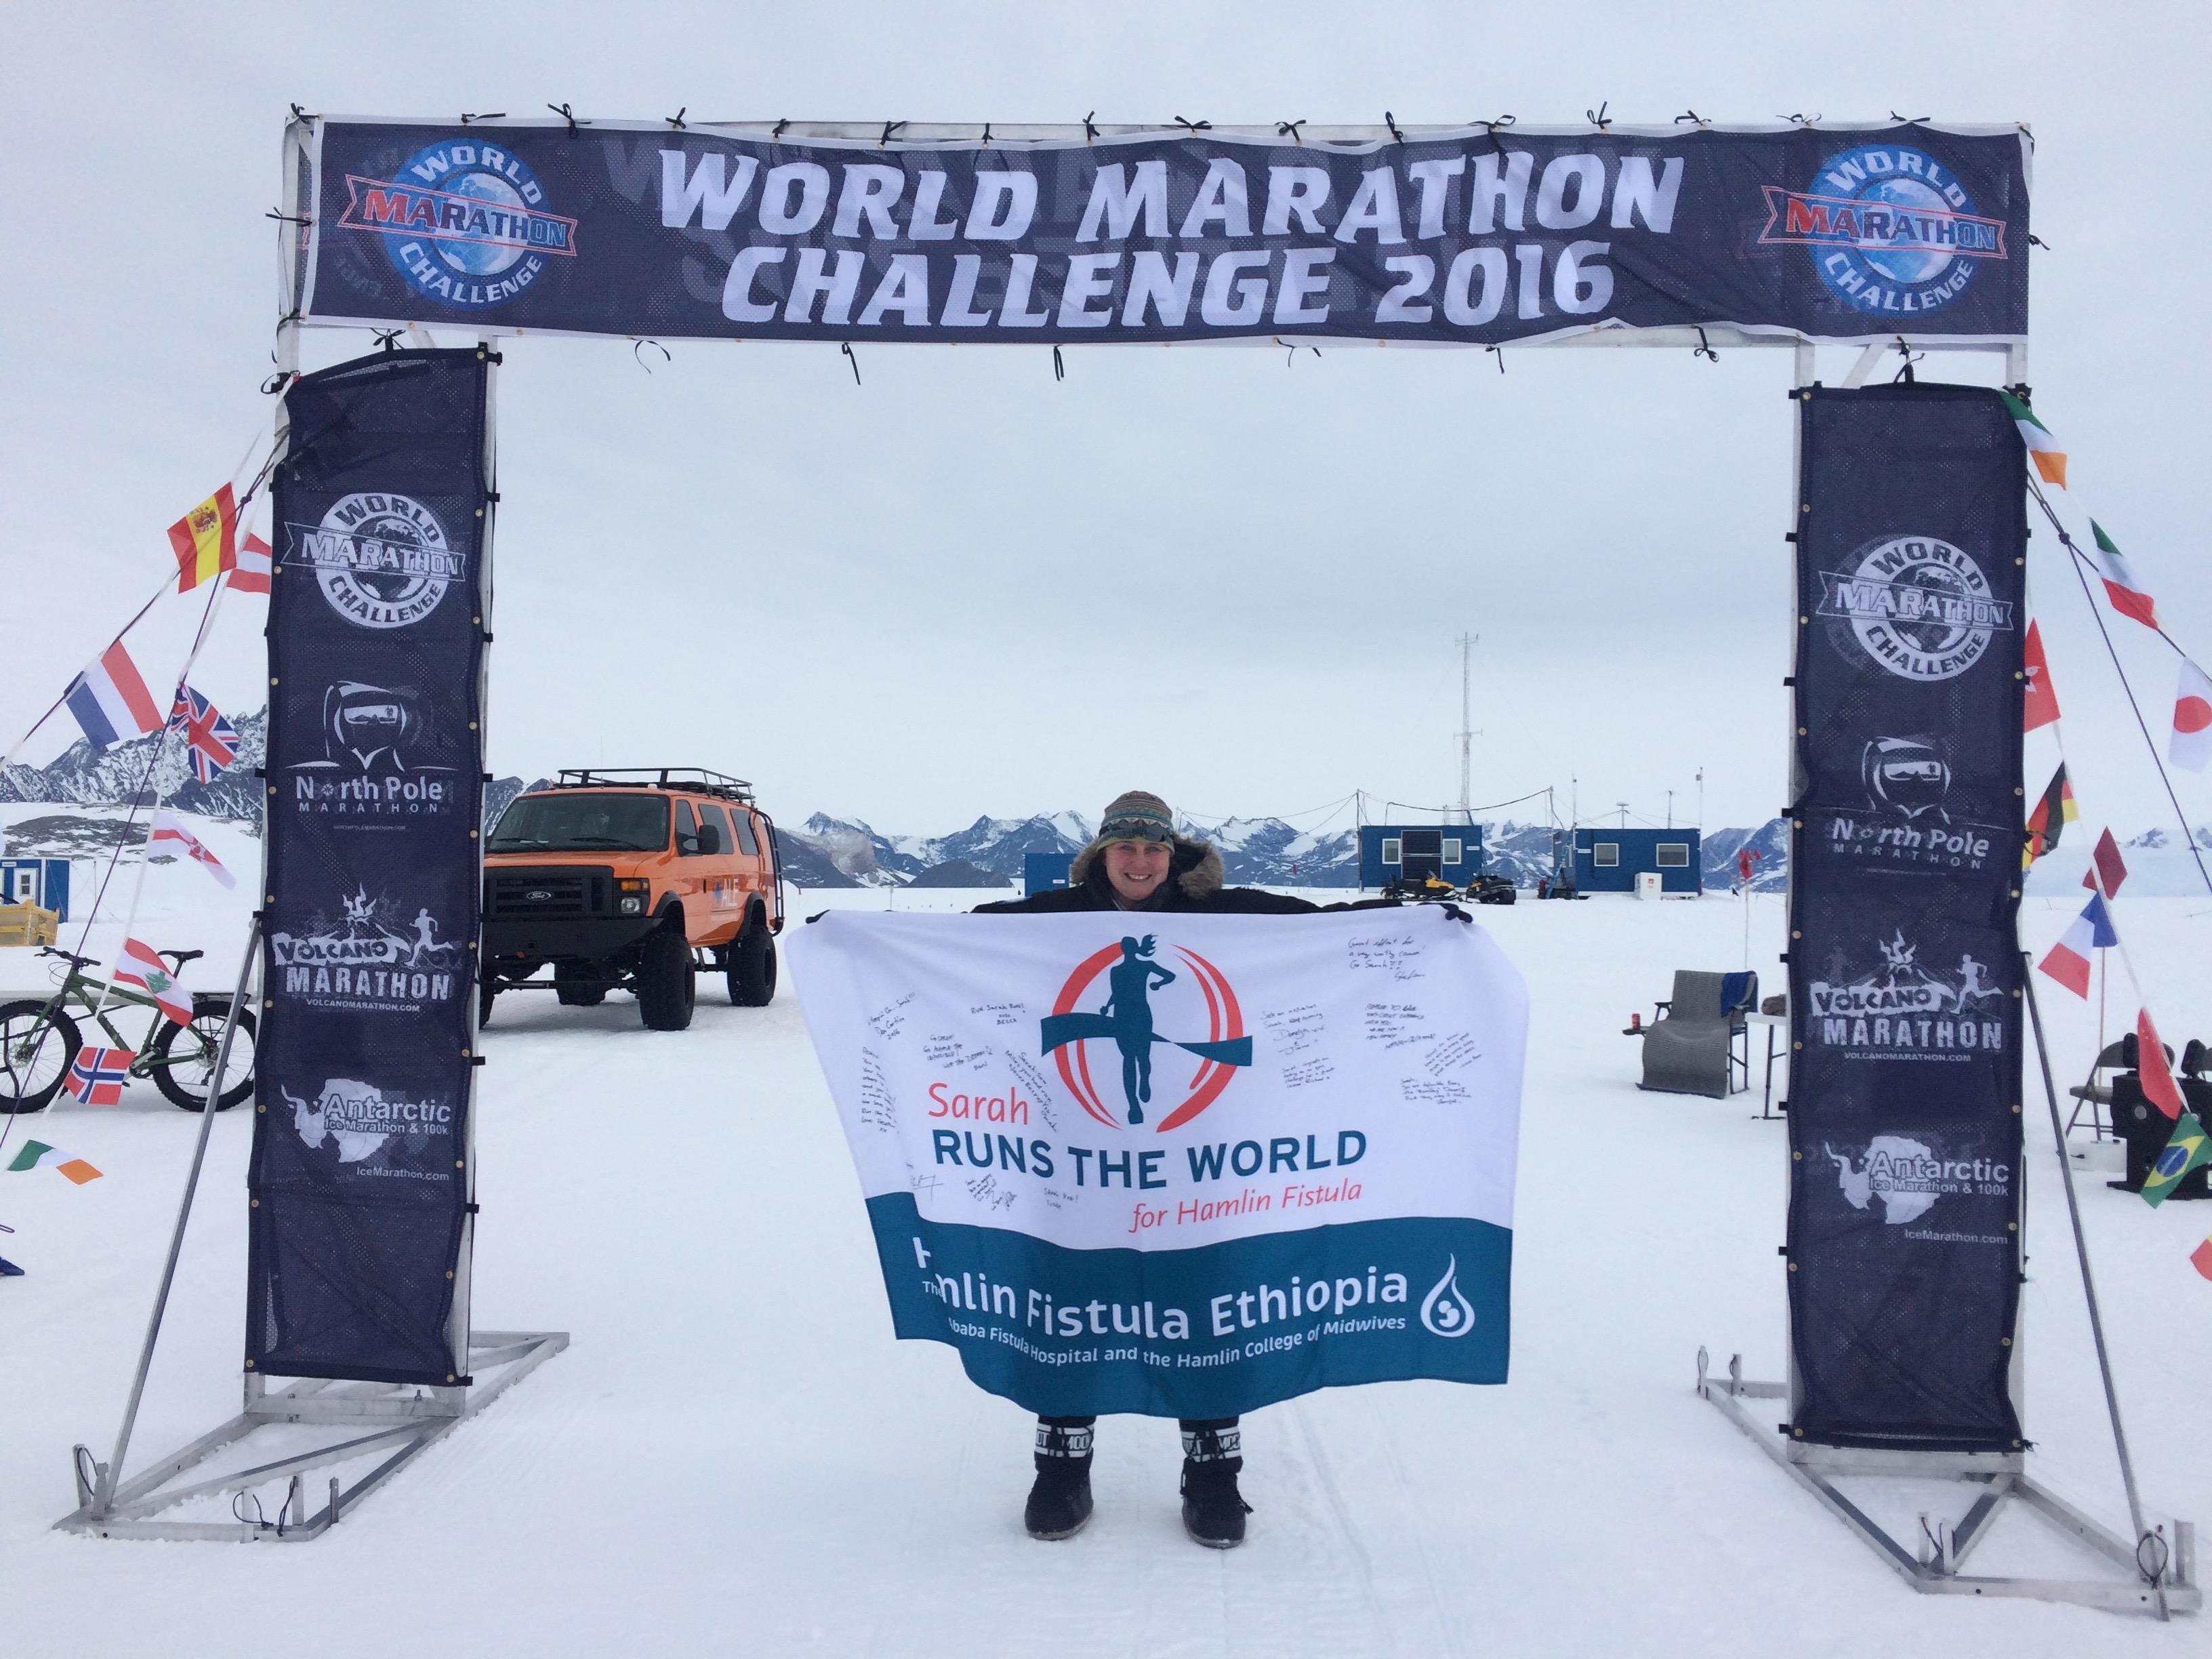 Sarah Ames at the finish line in Antarctica. (Courtesy of Sarah Ames)